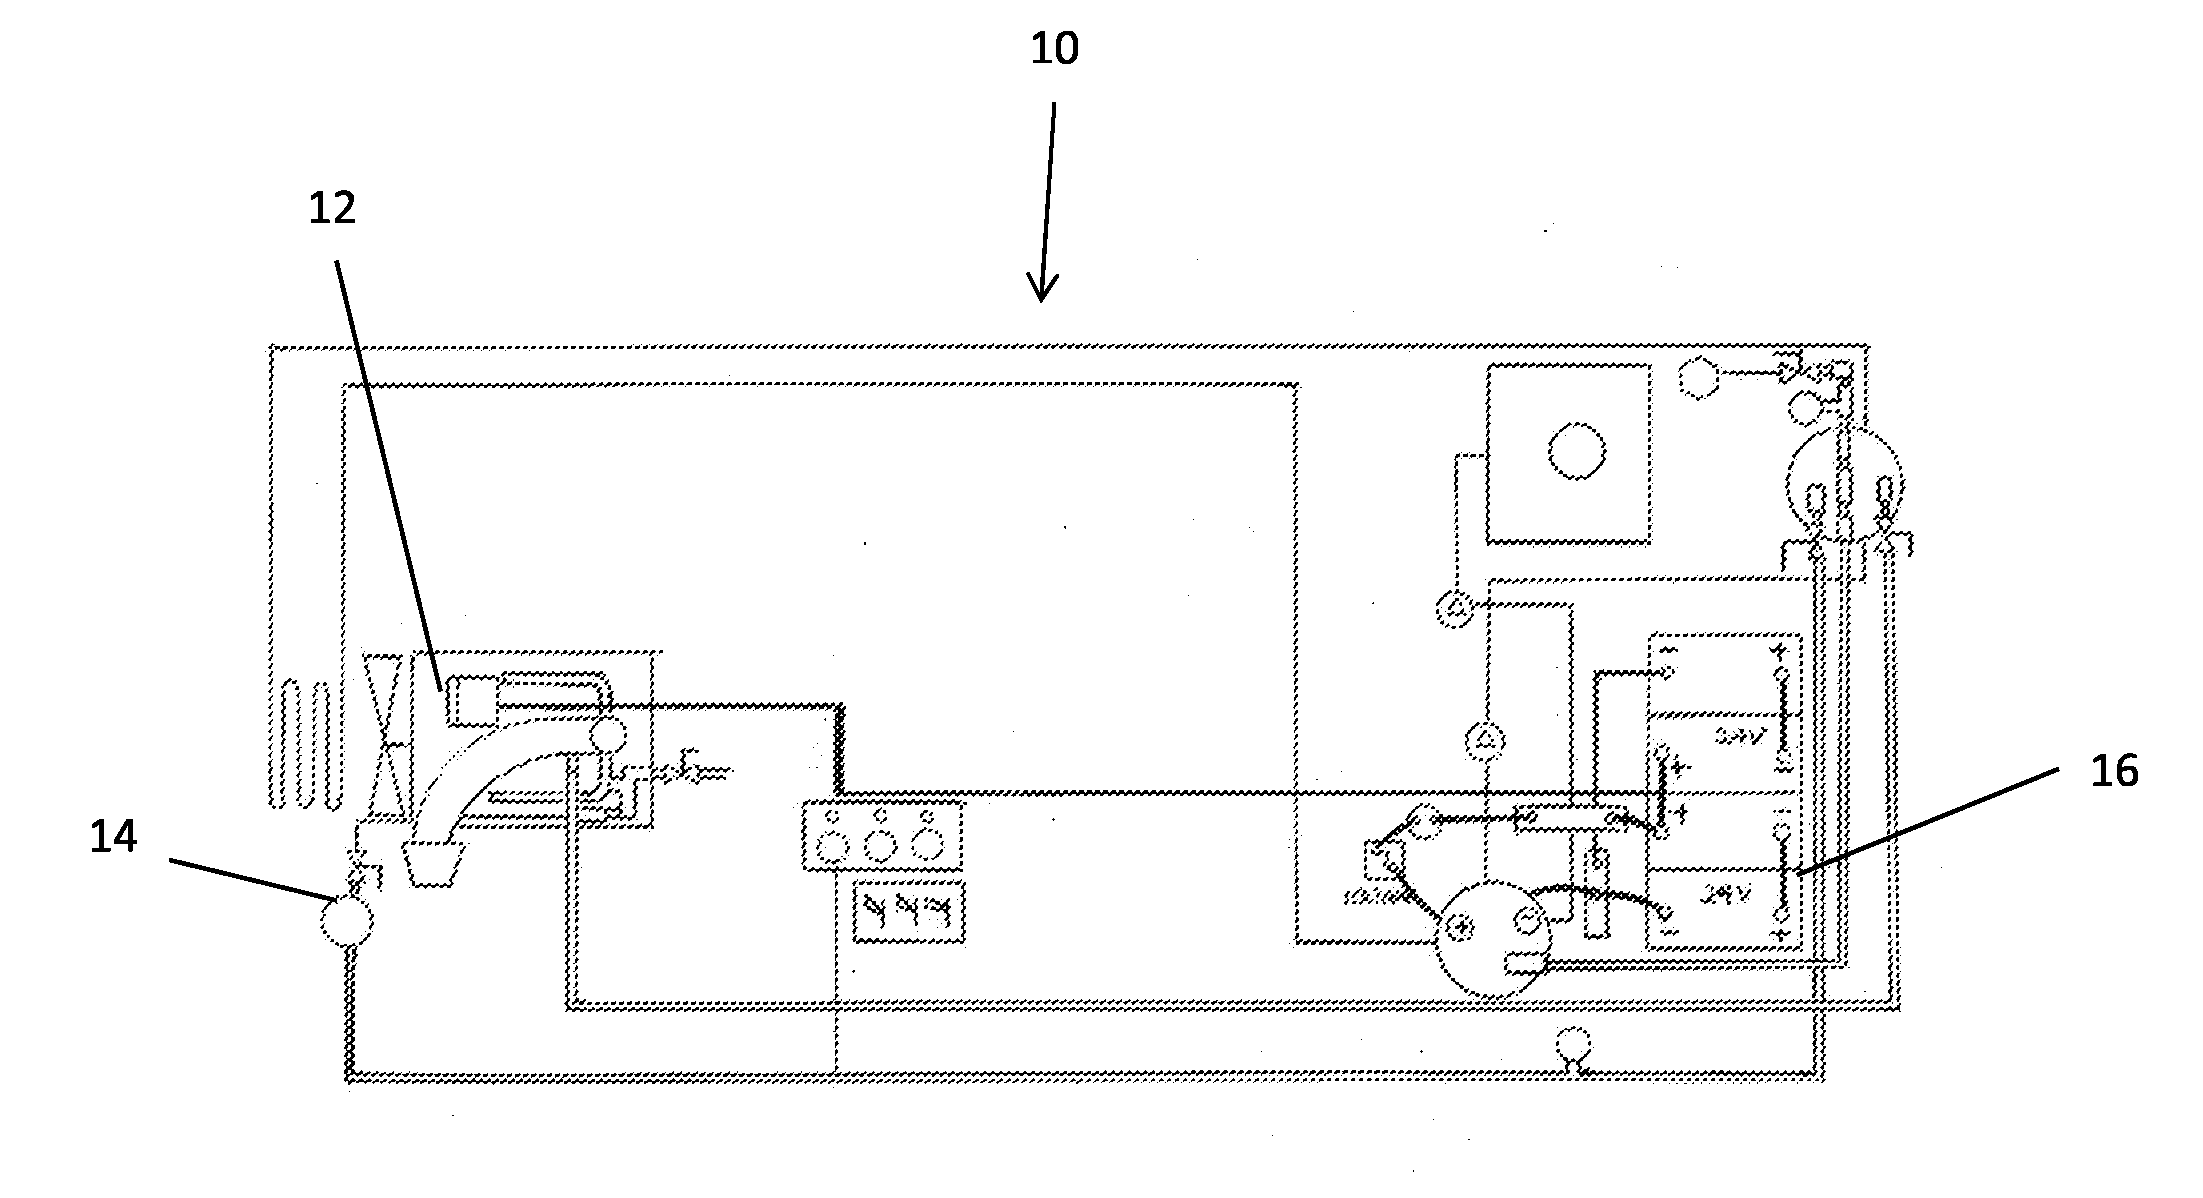 Method and system for using the by-product of electrolysis